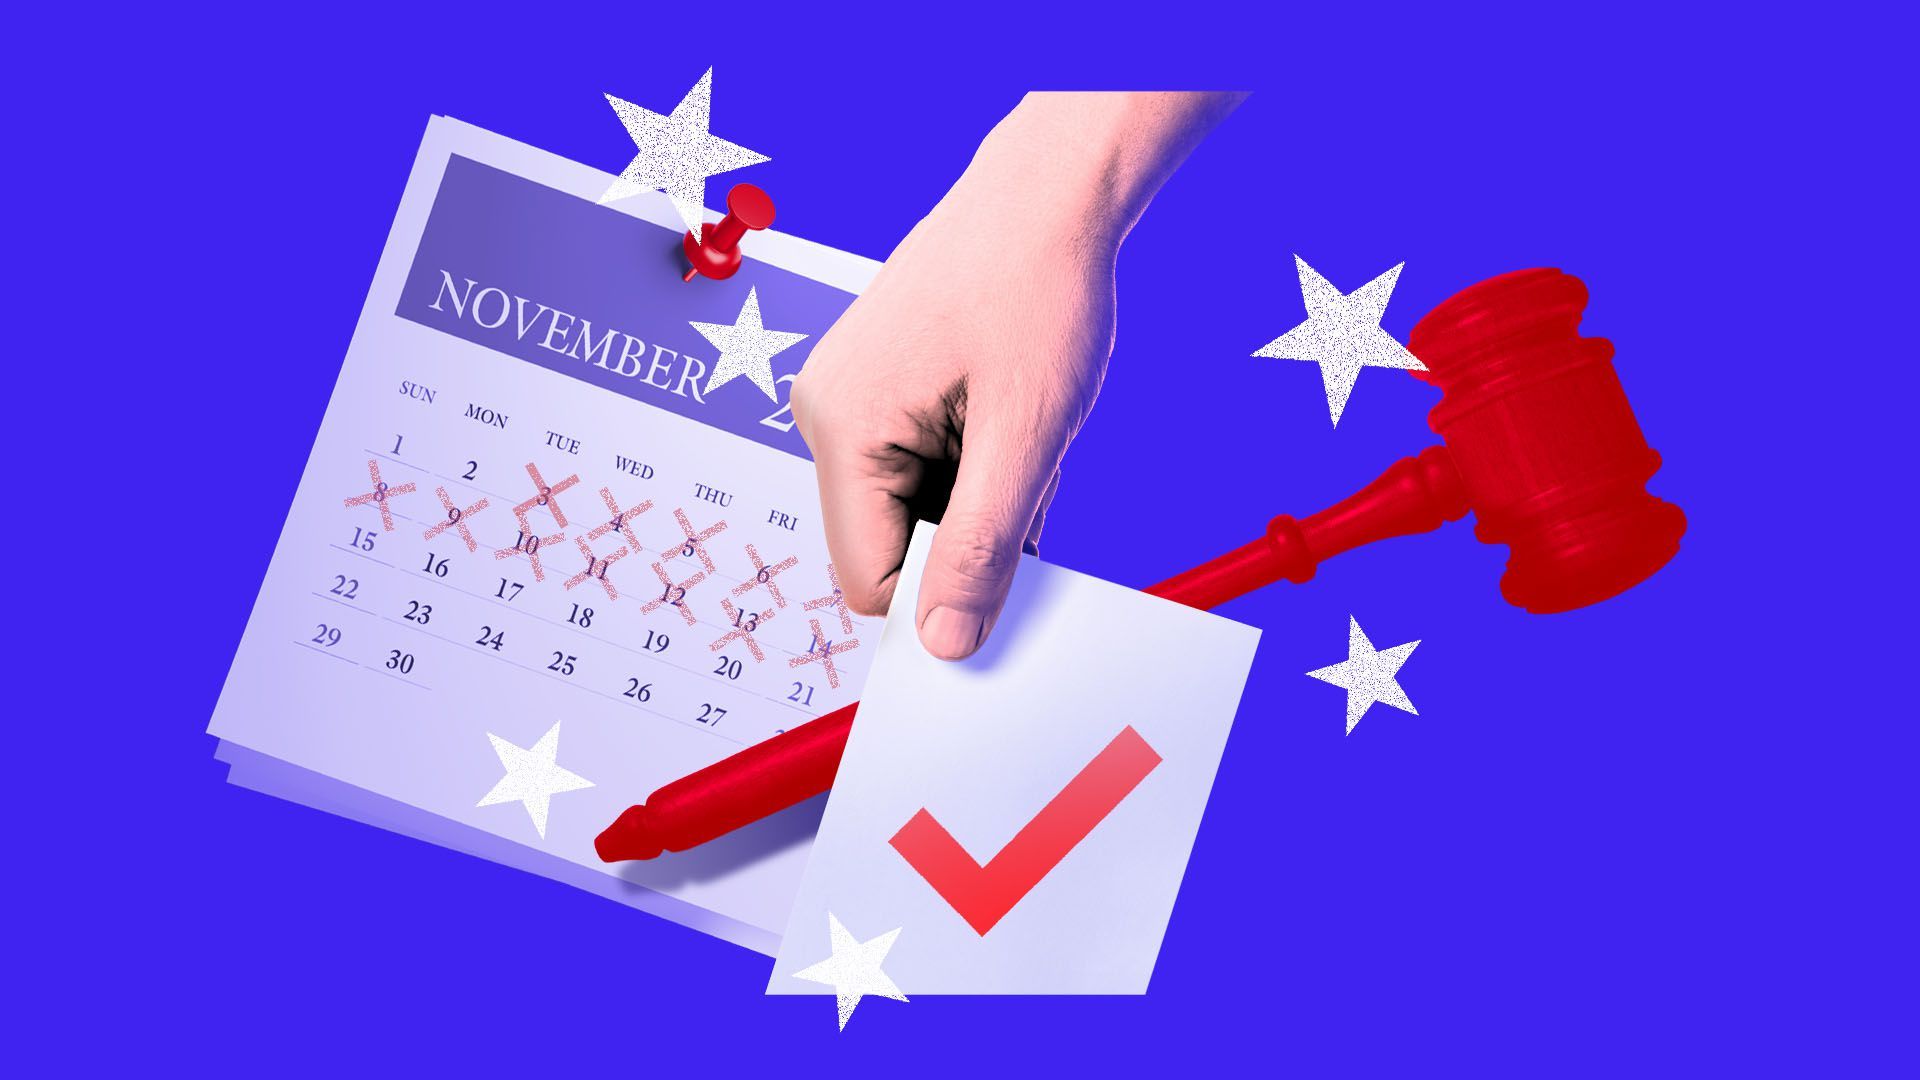 Illustration of a hand casting a ballot with a calendar and a gavel in the background